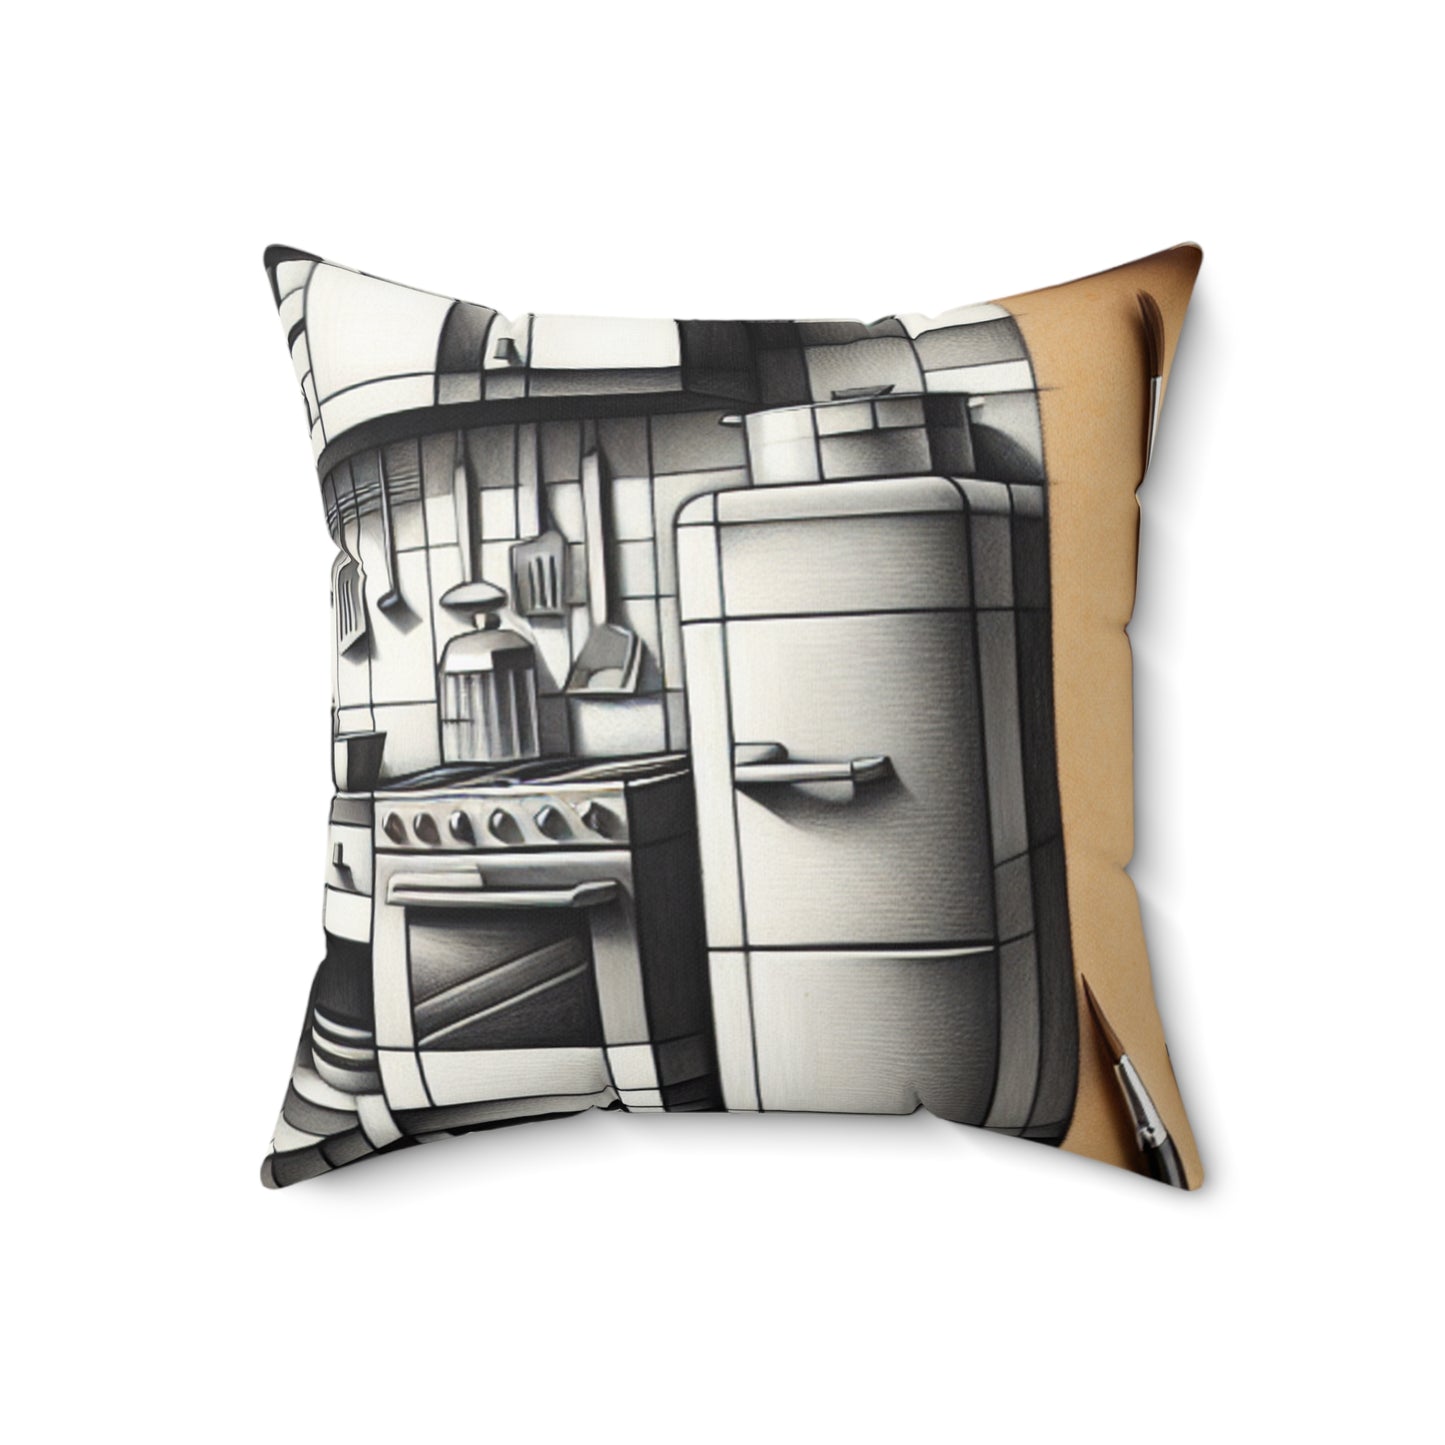 "Cubist Kitchen Collage" - The Alien Spun Polyester Square Pillow Cubism Style